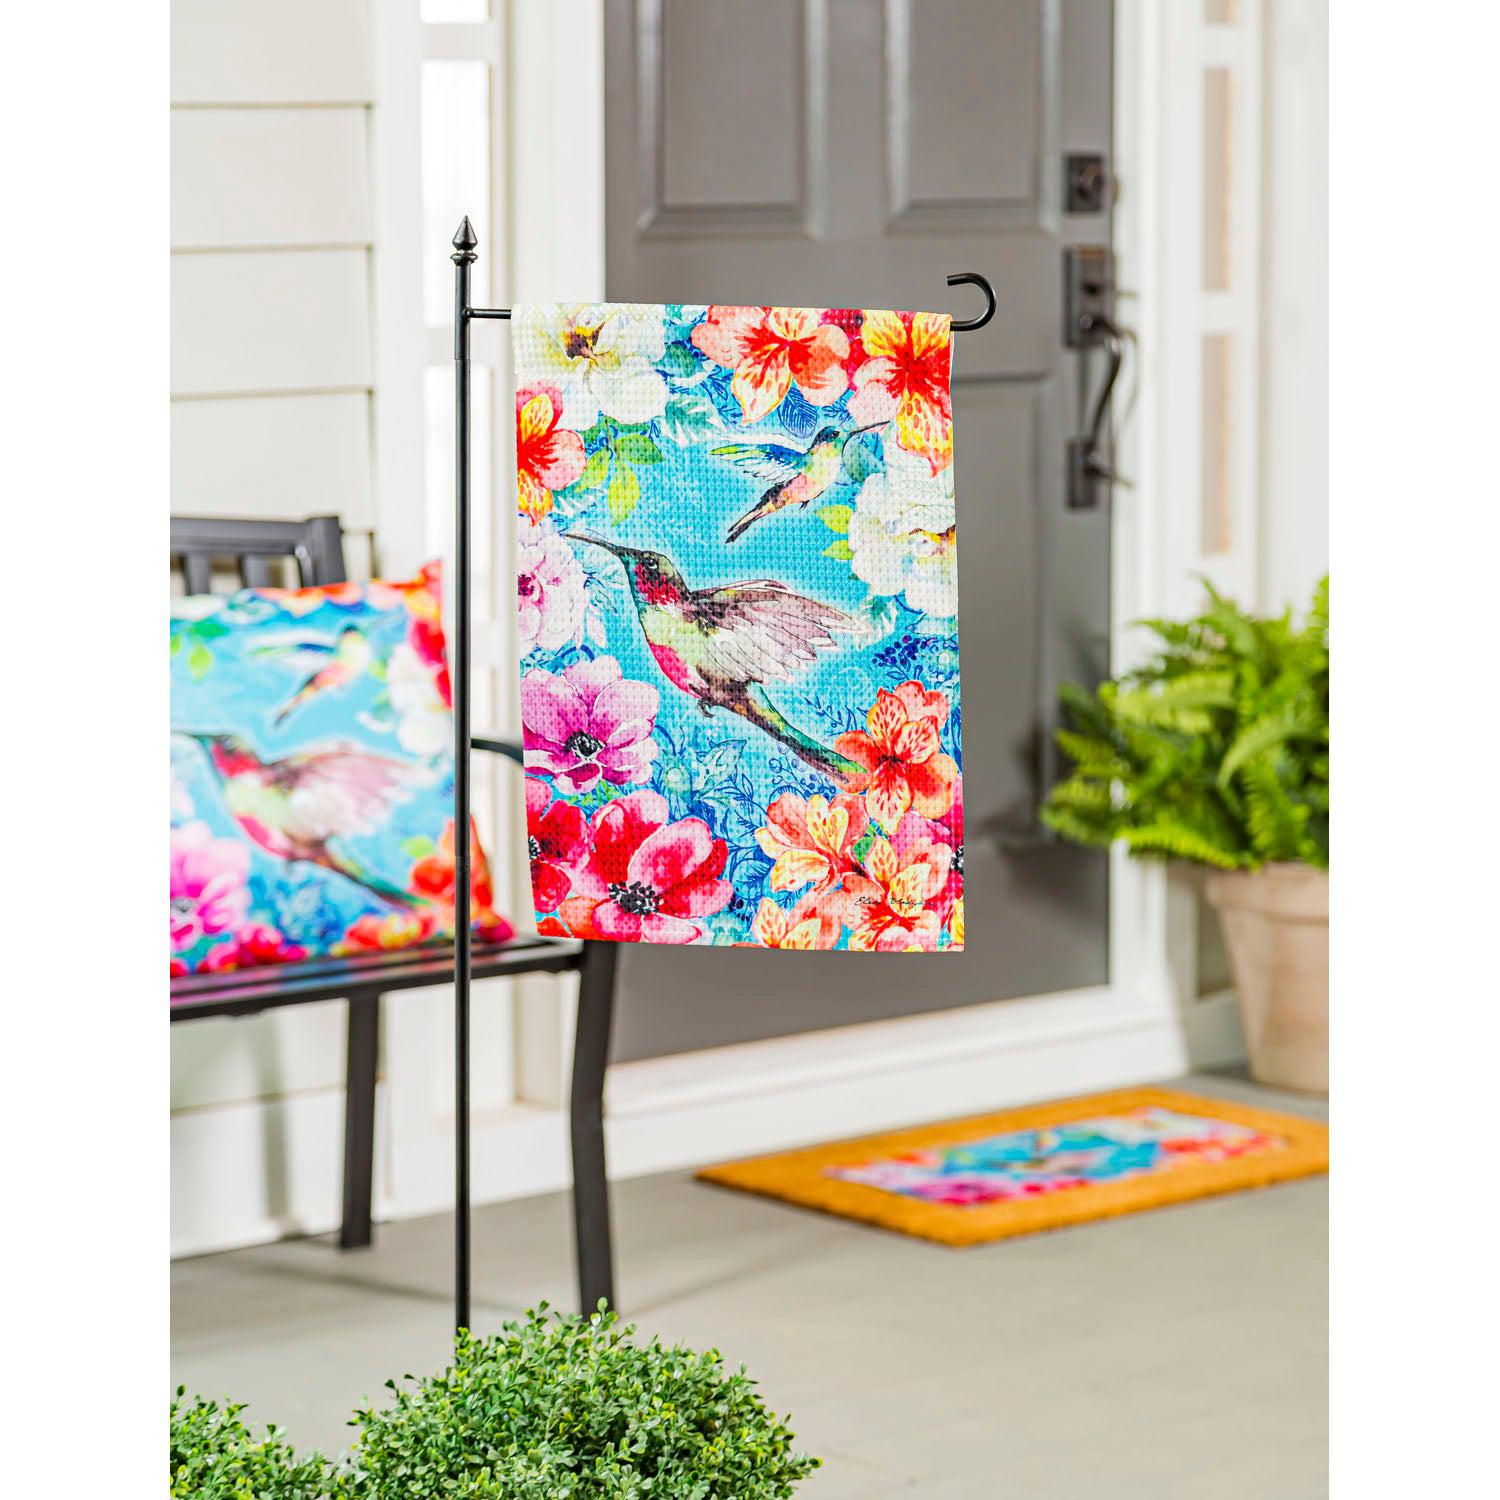 The Bright Flowers and Hummingbirds garden flag features a pair of hummingbirds flying among a multitude of brightly colored flowers. 